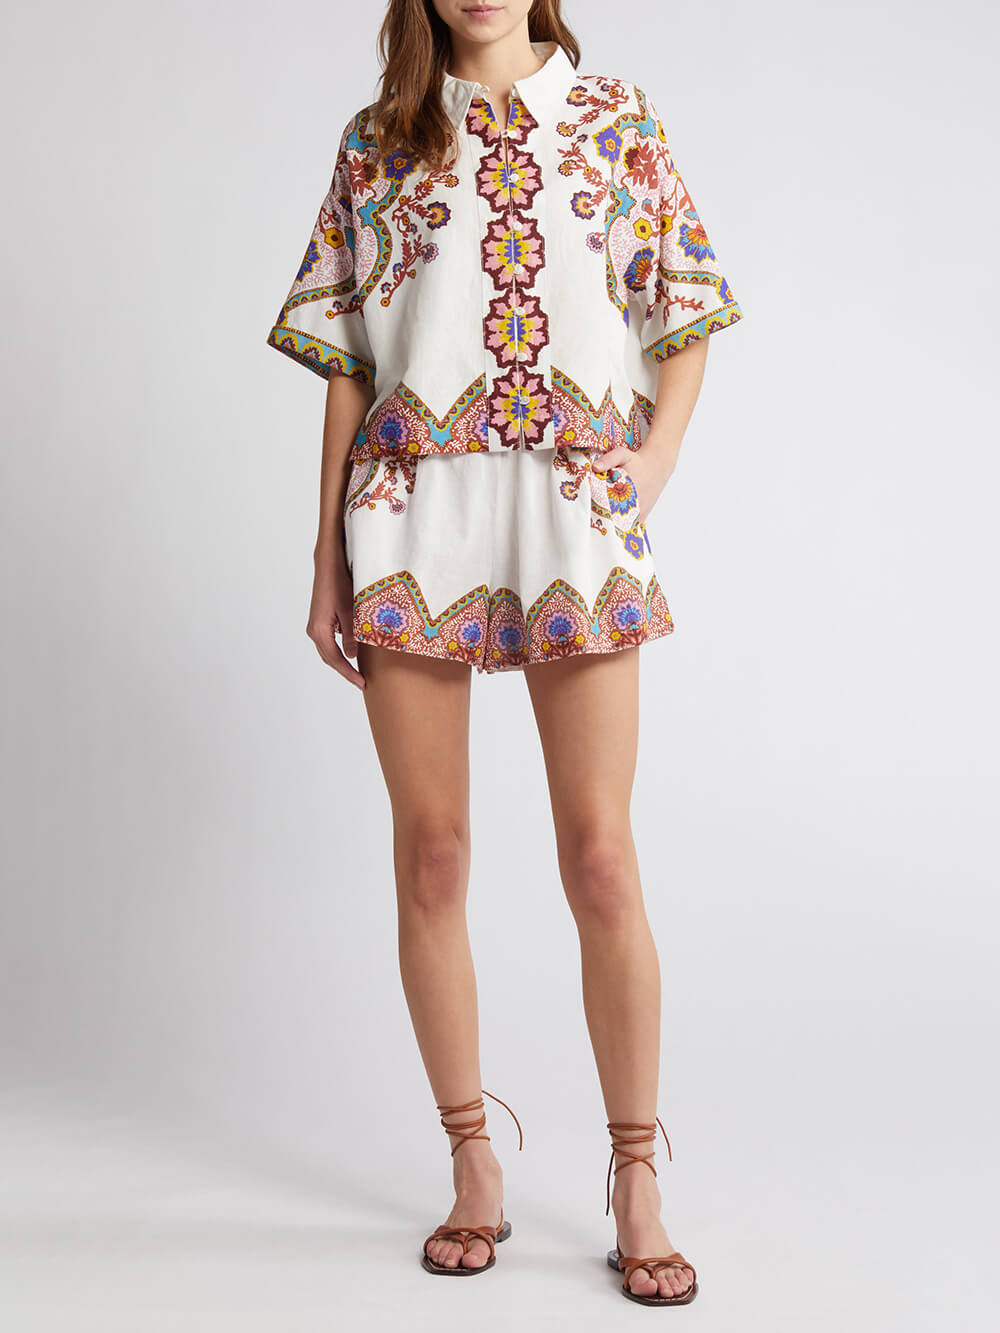 Ethnic Floral Print Shirt At Shorts Suit